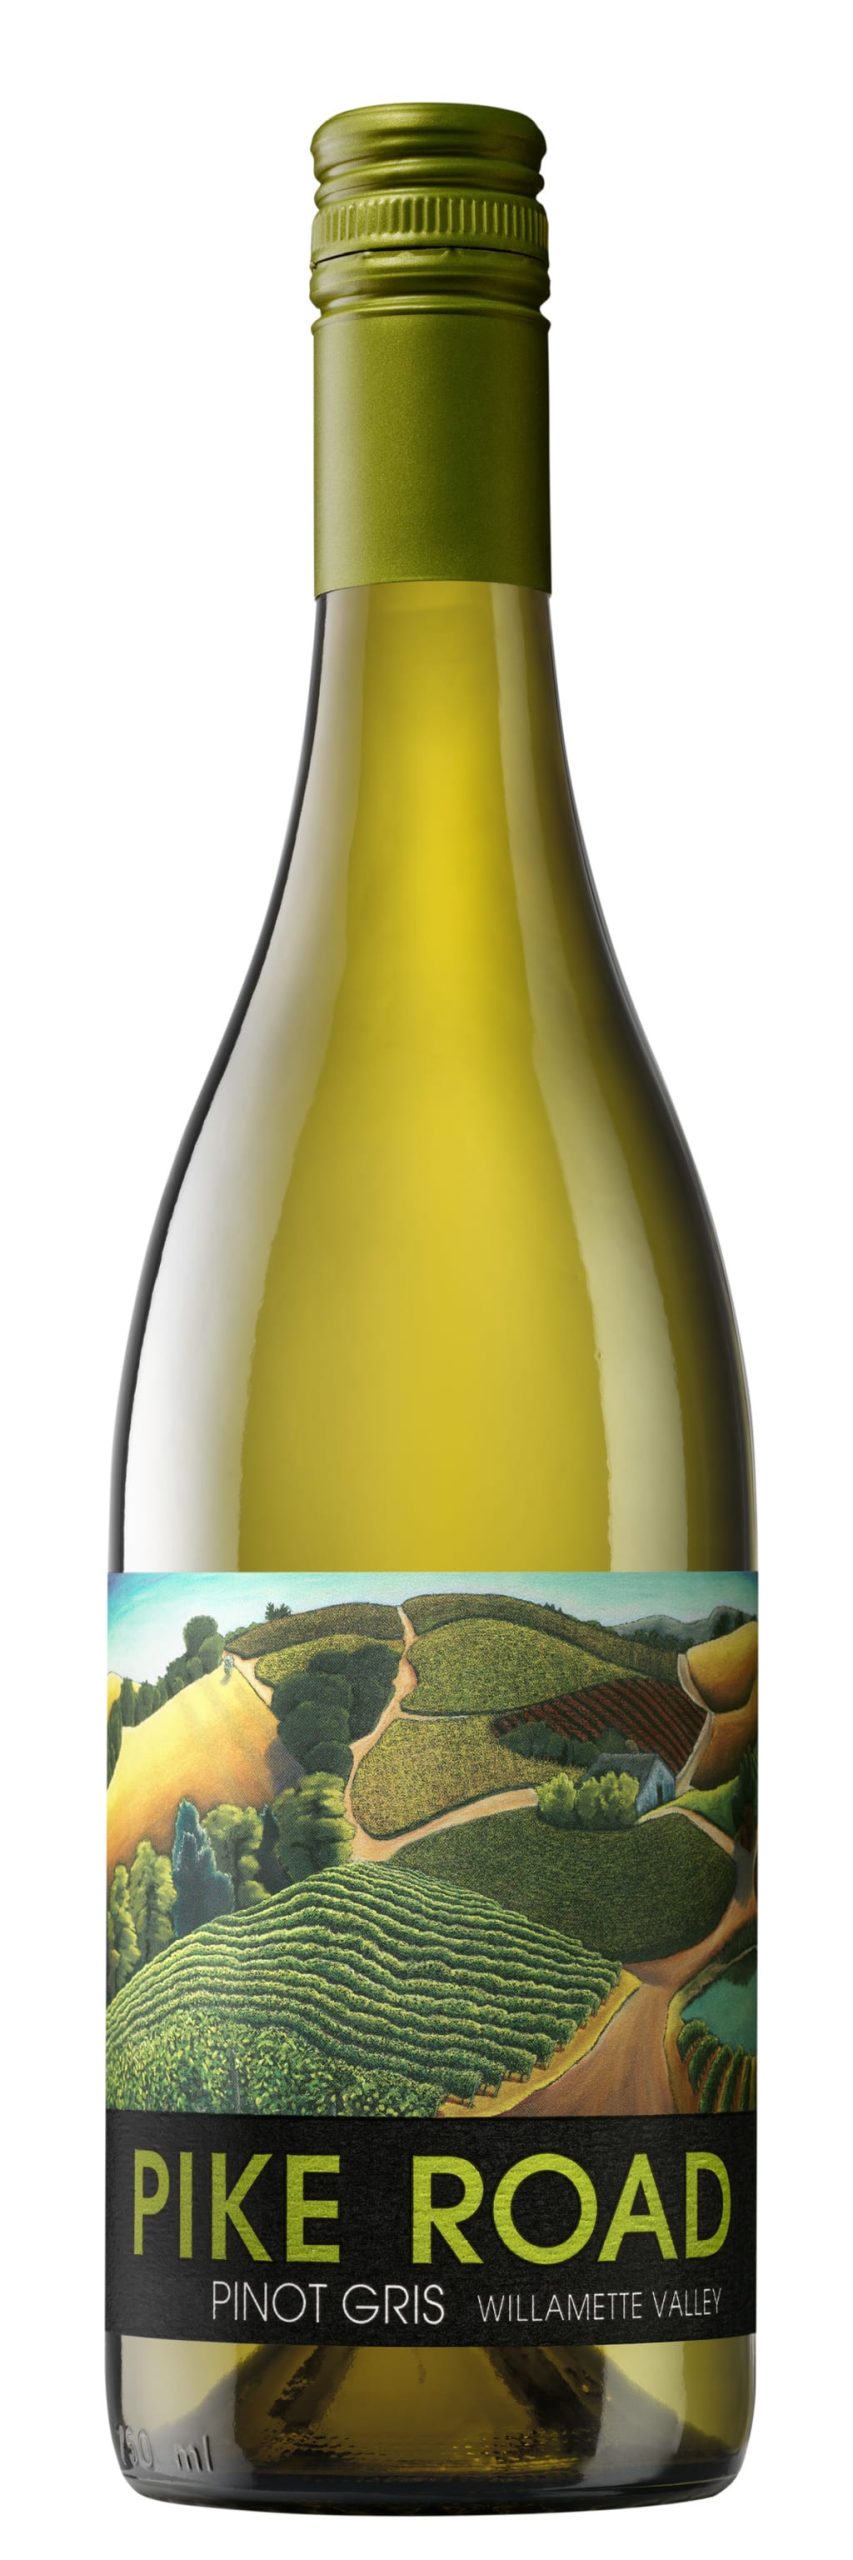 Pike Road Pinot Gris